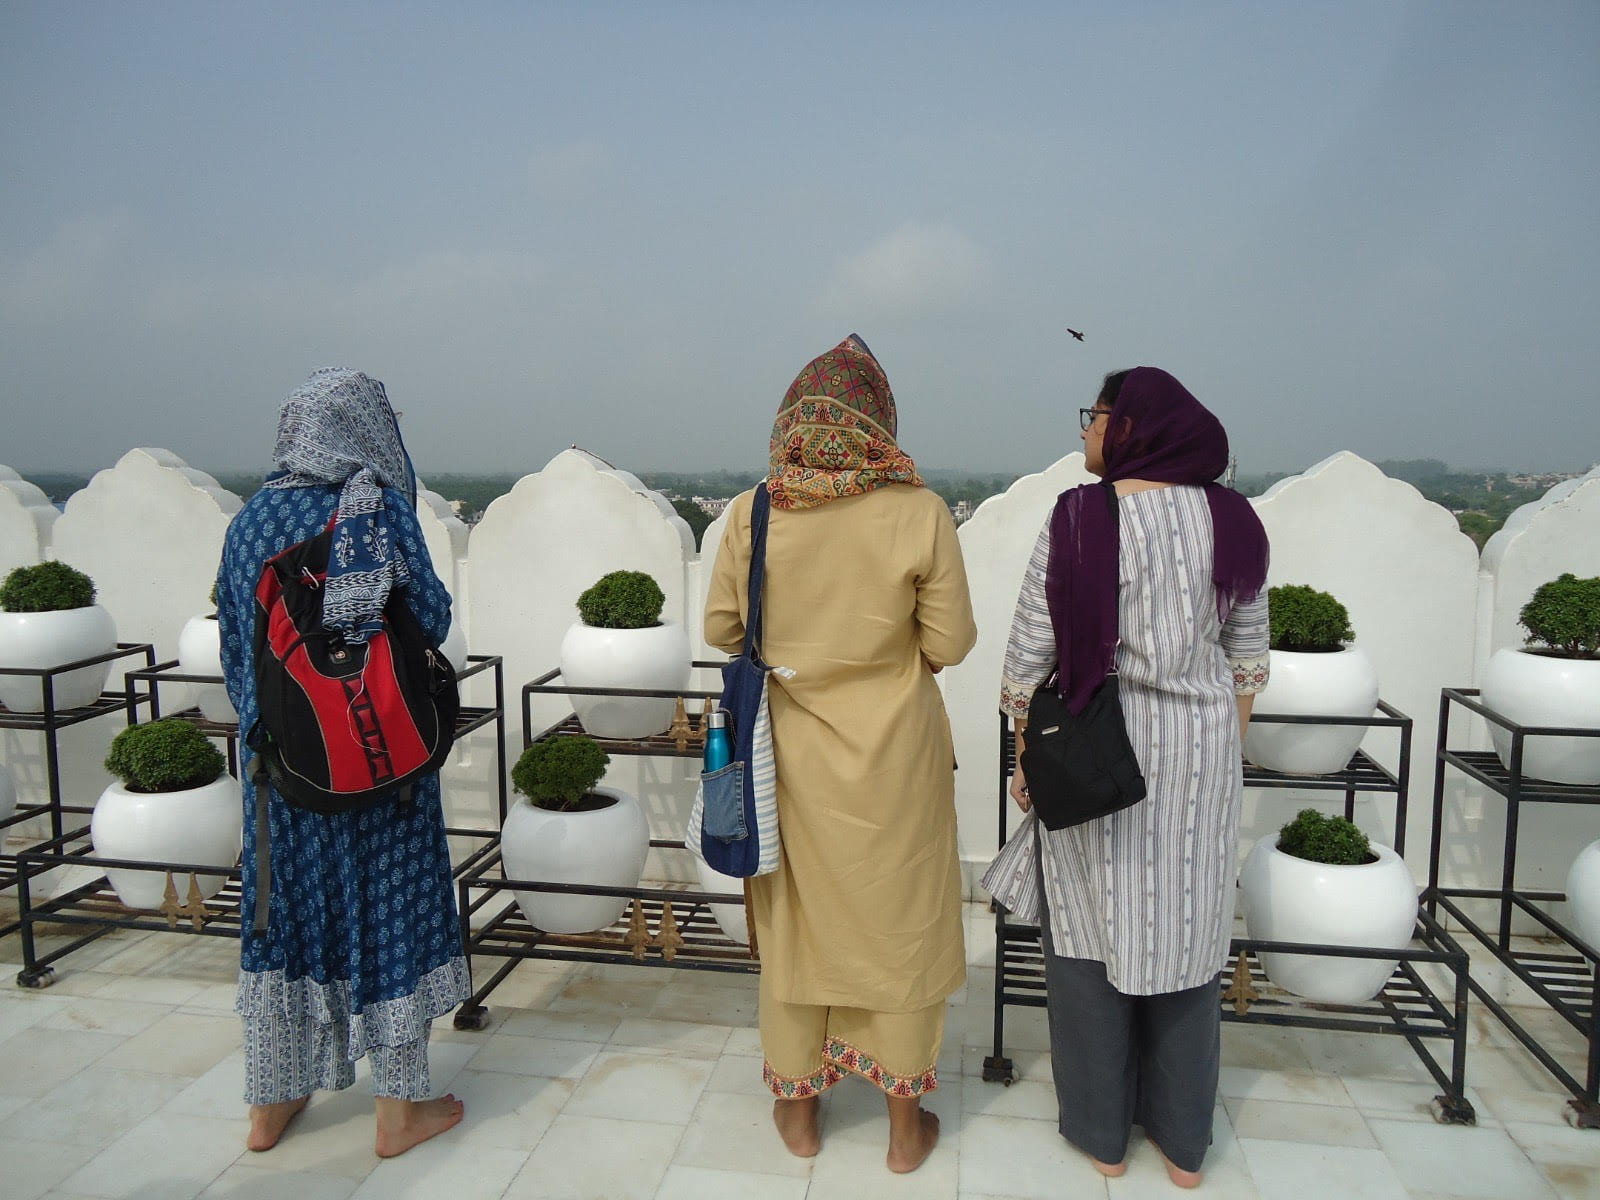 A picture of women in head coverings facing away from the camera